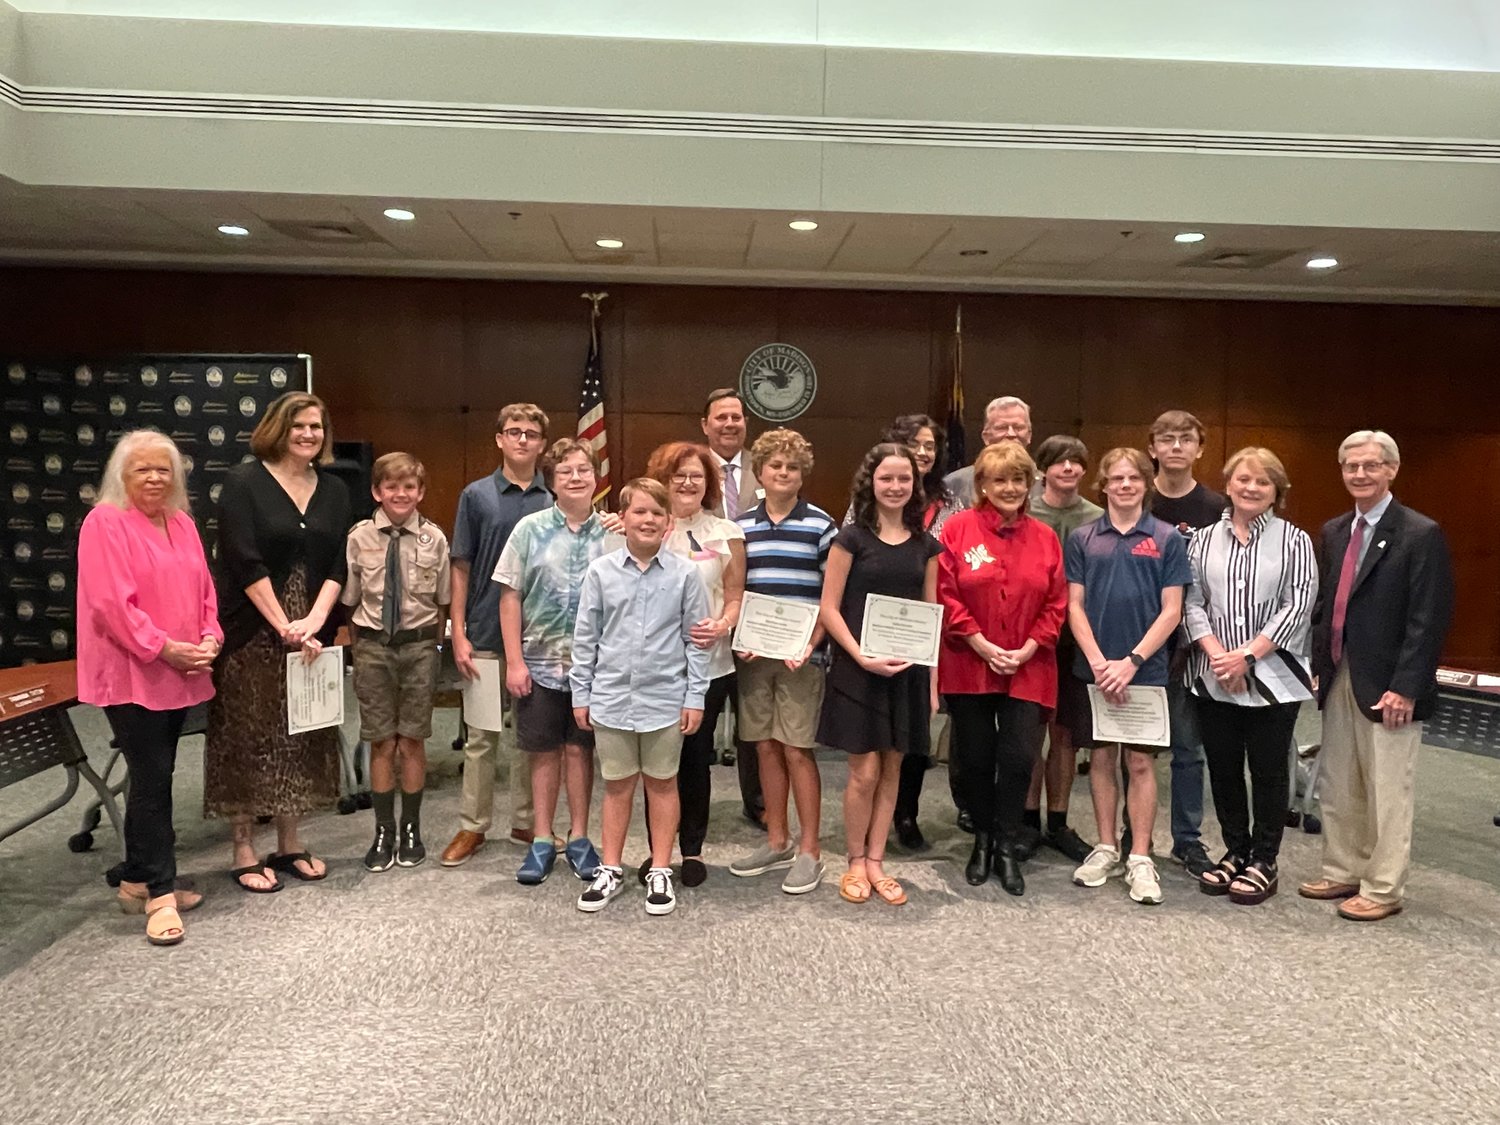 The Madison Mayor and Board of Aldermen recognized the Madison Middle School Robotics team on Tuesday for their recent achievements.